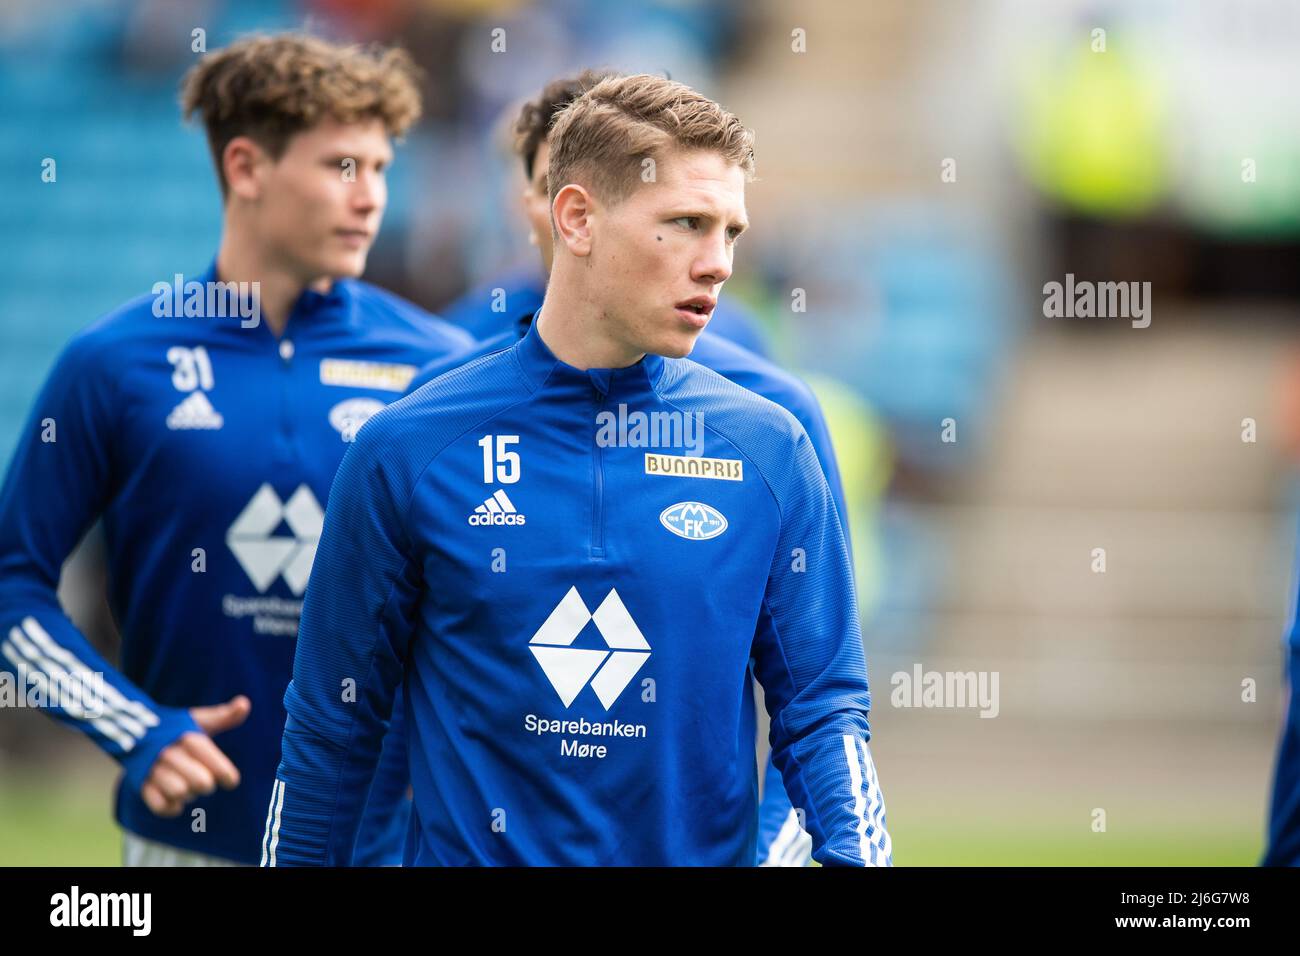 Oslo, Norway. 01st, May 2022. Markus Andre Kaasa (15) of Molde is warming up before the Norwegian Cup final, the NM Menn final, between Bodoe/Glimt and Molde at Ullevaal Stadion in Oslo. (Photo credit: Gonzales Photo - Jan-Erik Eriksen). Credit: Gonzales Photo/Alamy Live News Stock Photo